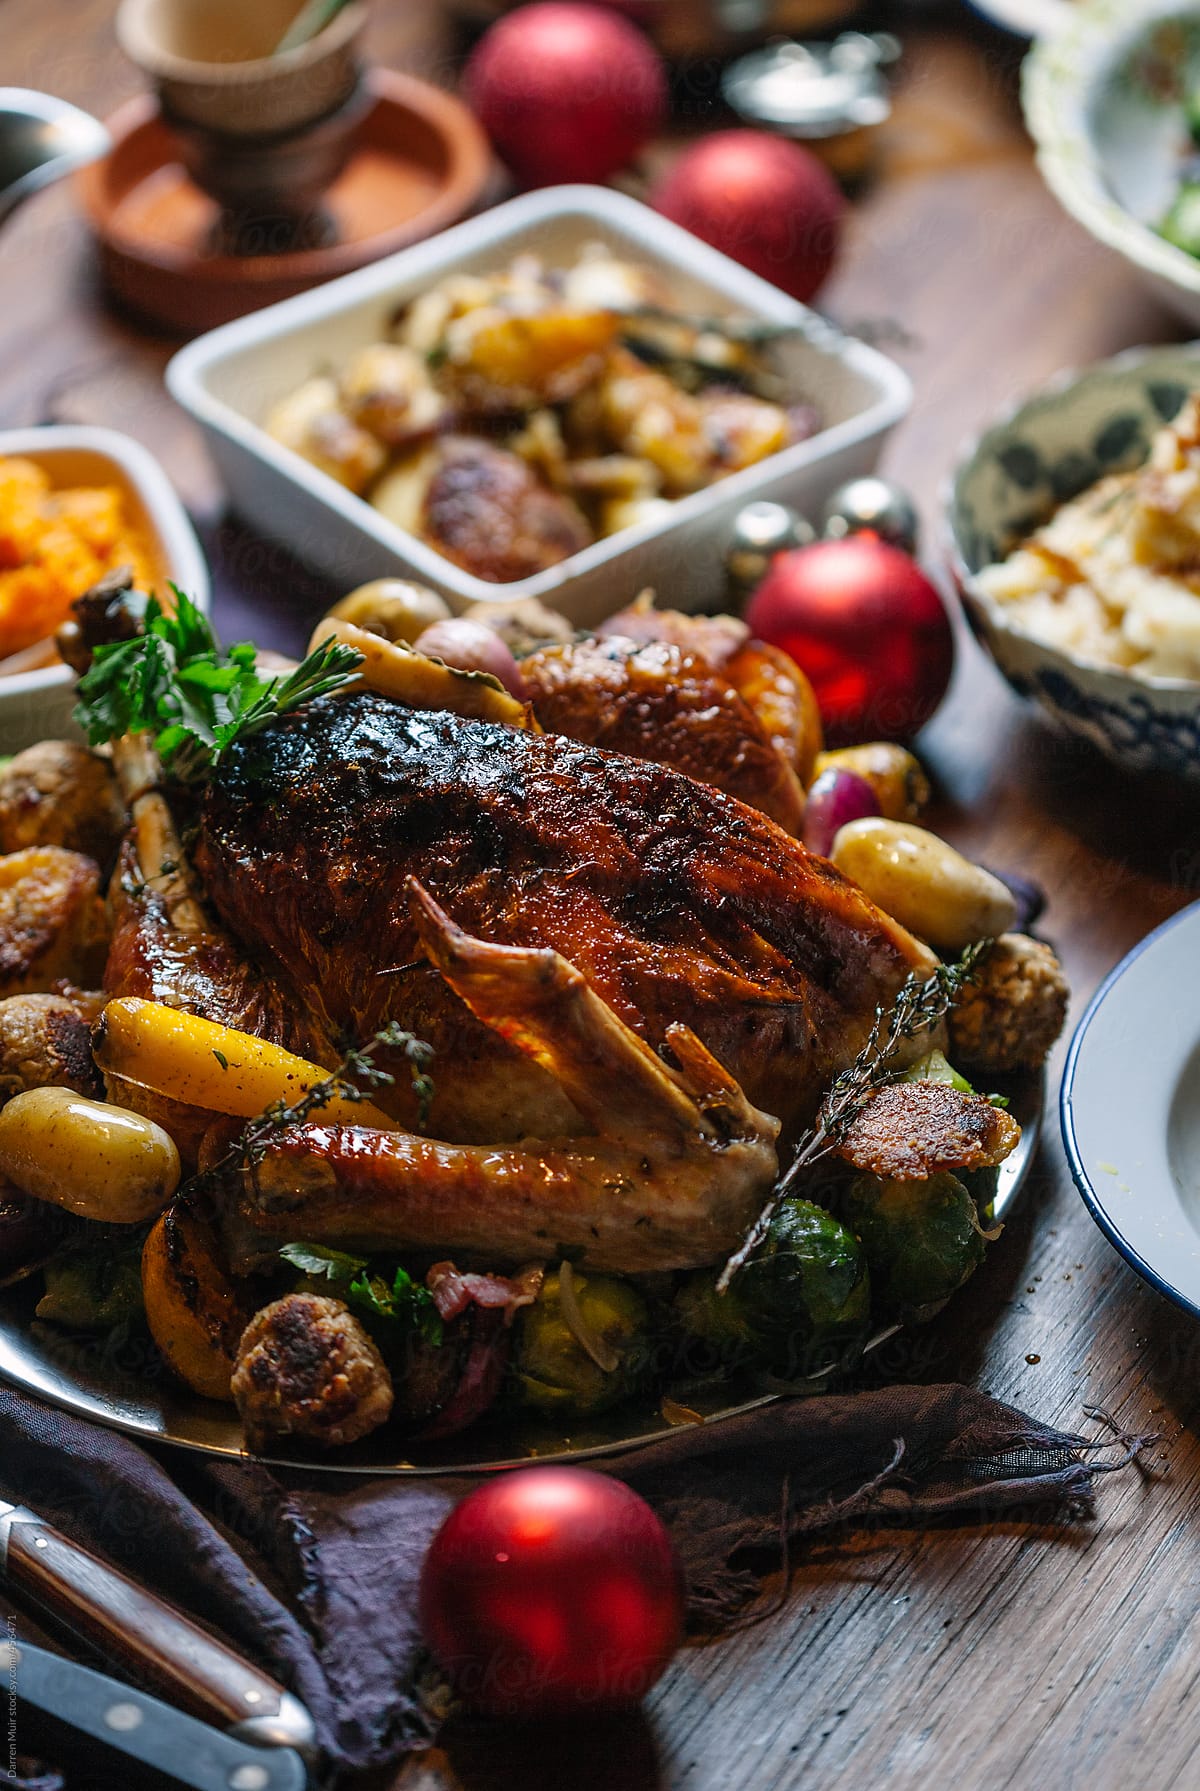 Christmas turkey and side dishes.